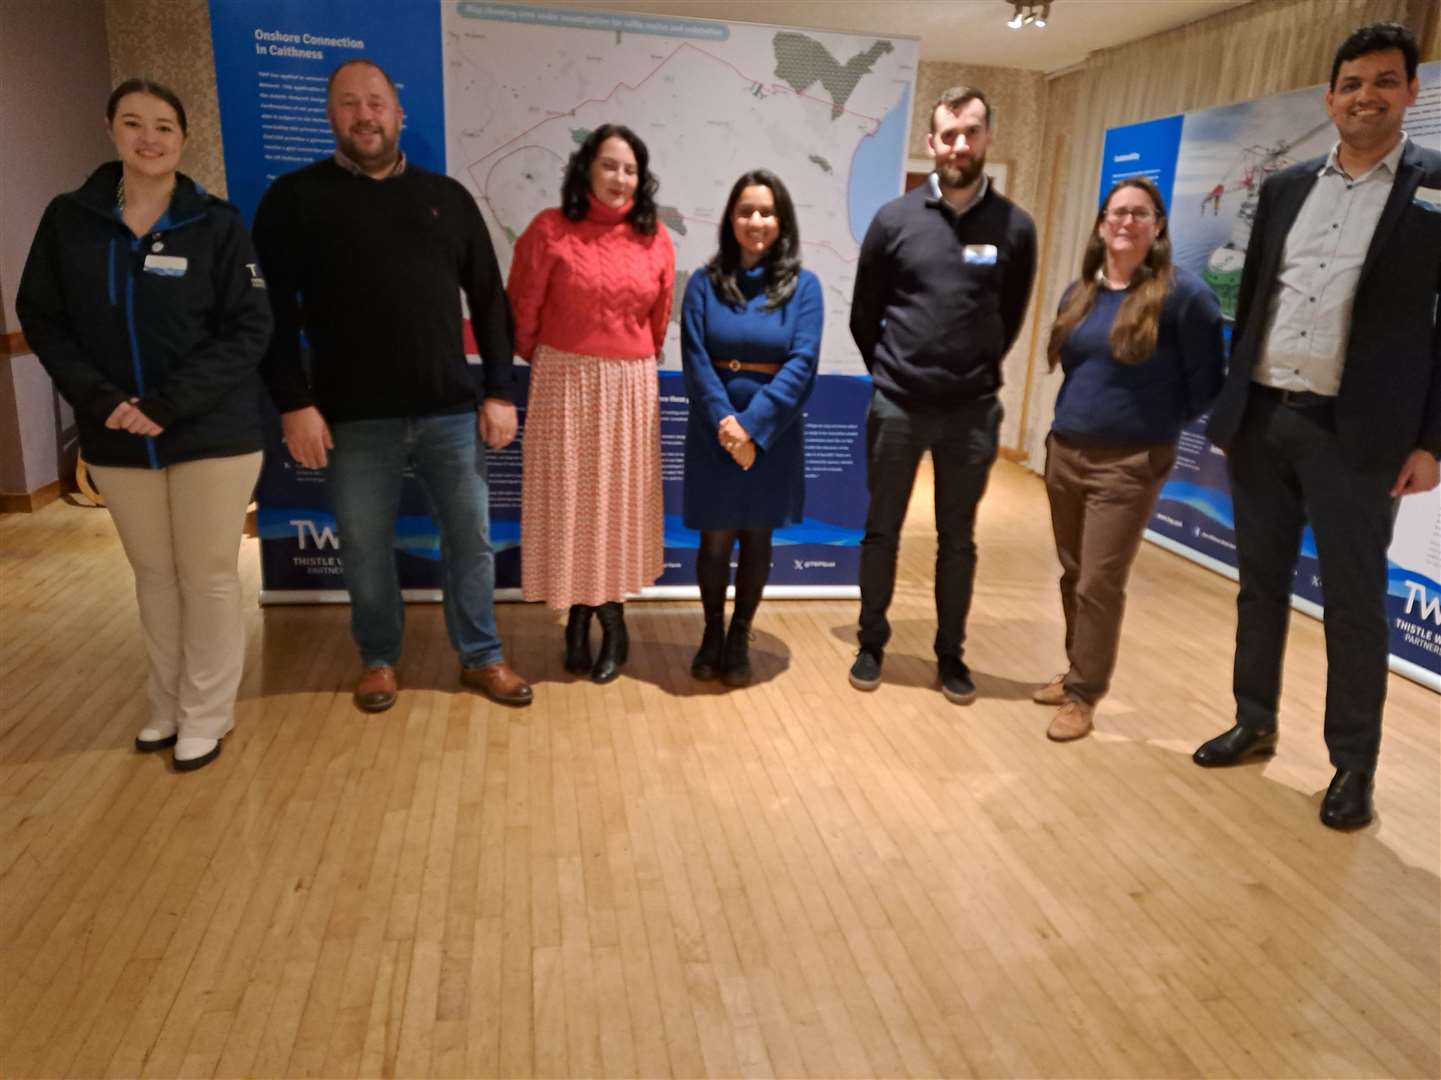 The TWP team at the information meeting in Thurso.